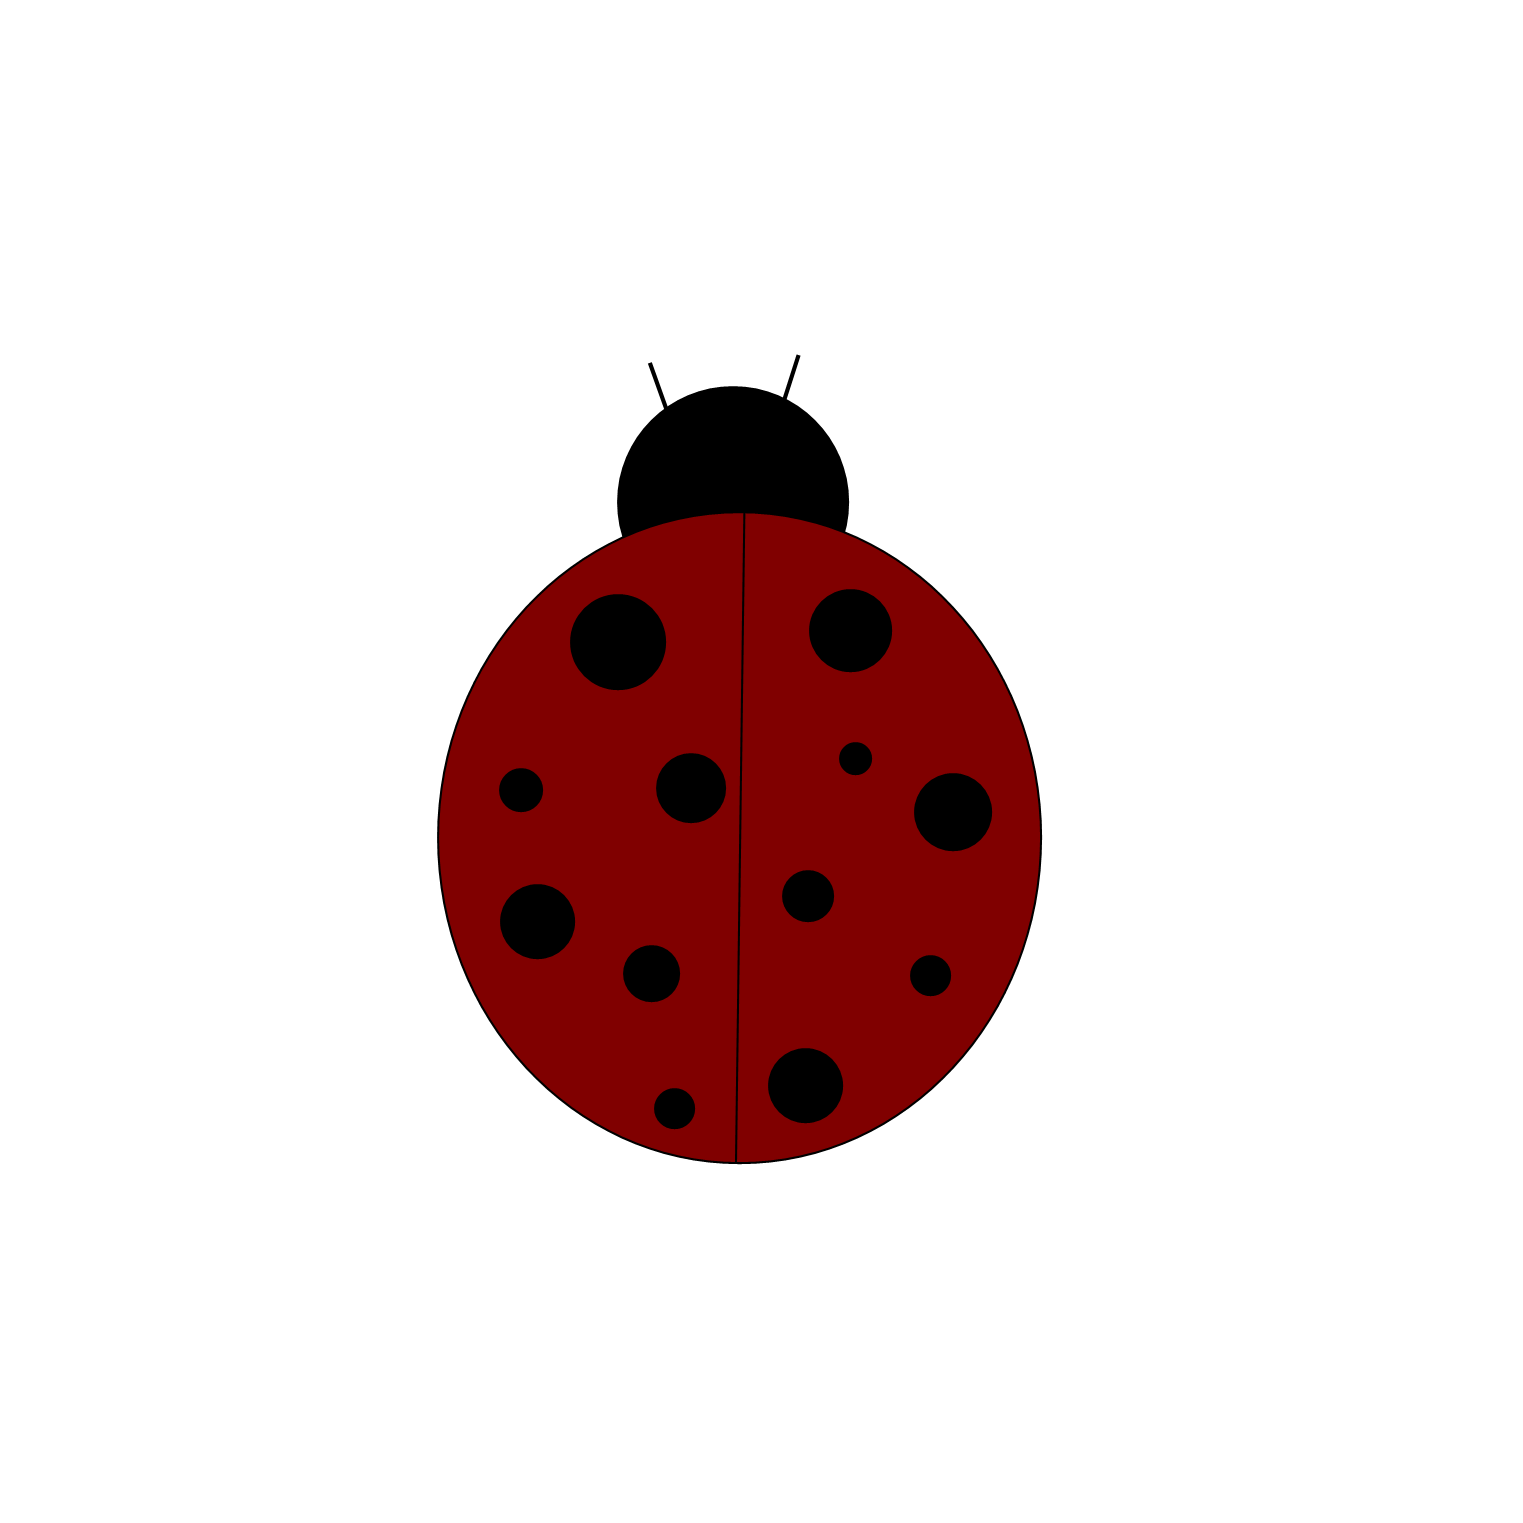 Free ladybug clipart for invitations clipart clipart